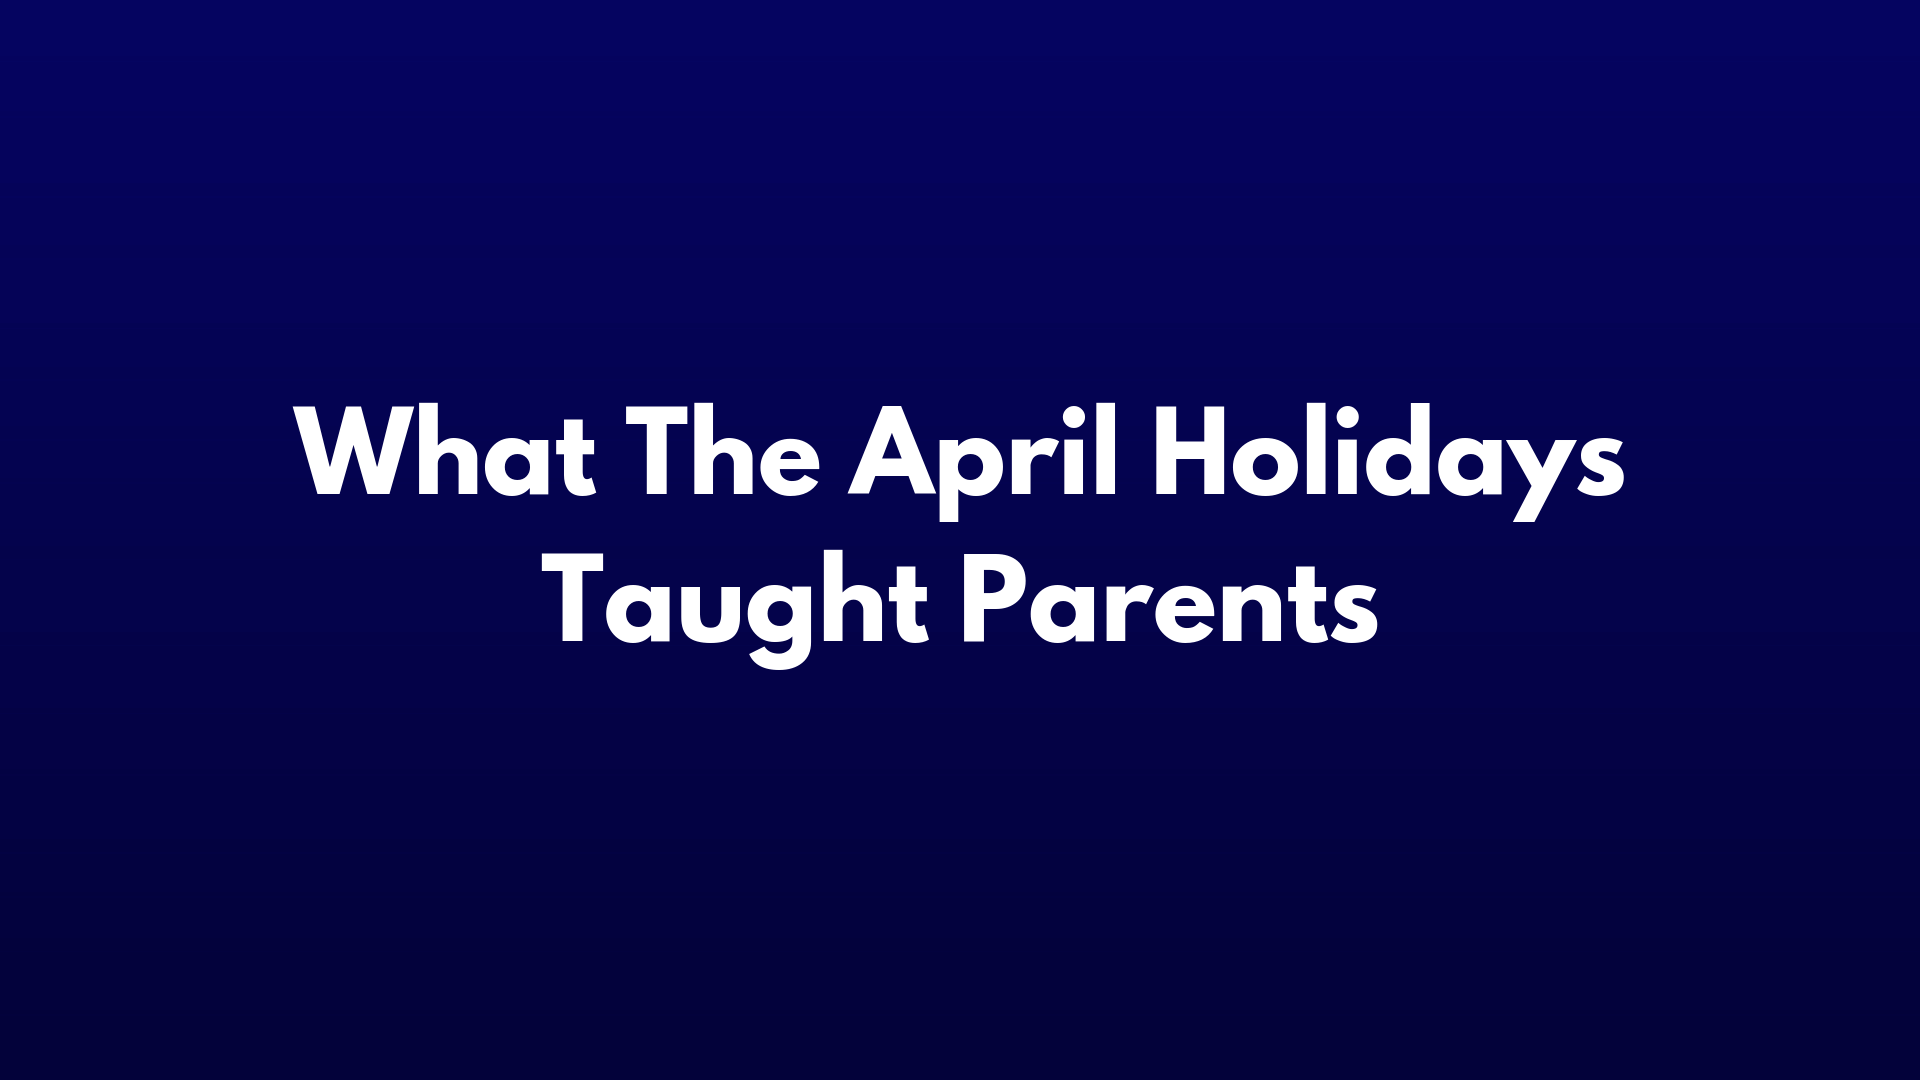 5 Parenting Tips That The April Holidays Taught Us